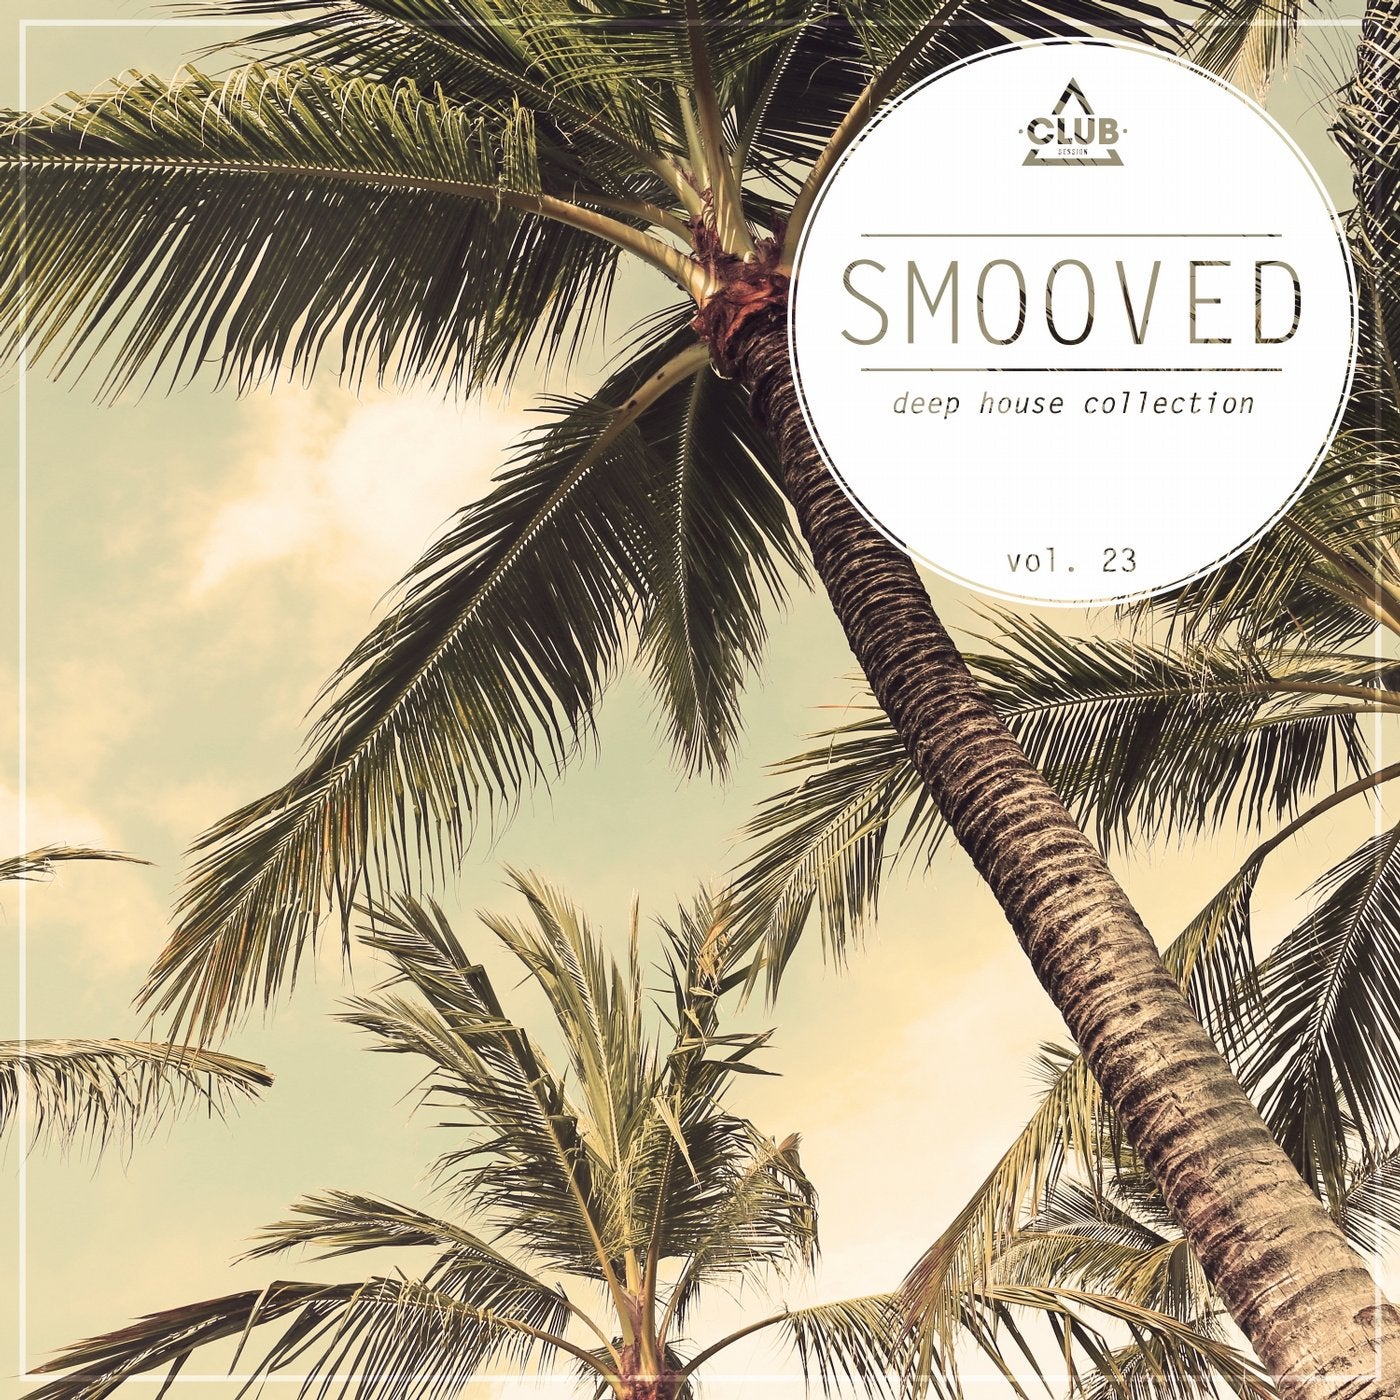 Smooved - Deep House Collection Vol. 23